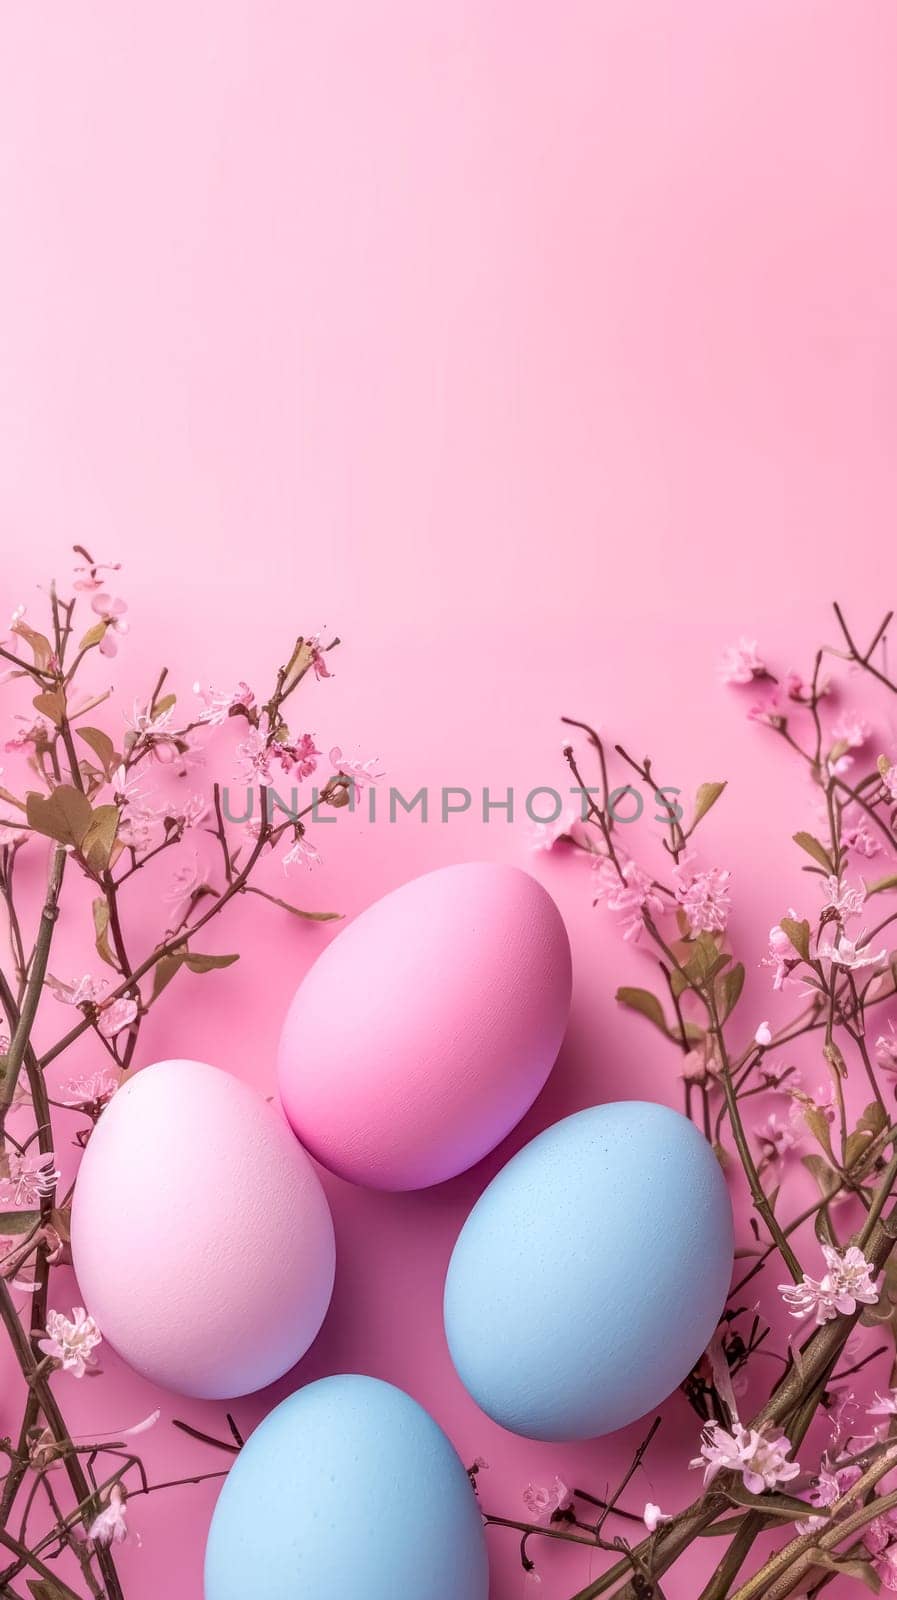 Easter composition with pastel-colored eggs amid gentle pink blossoms on a pink background, evoking a sense of springtime joy and renewal. vertical banner with copy space